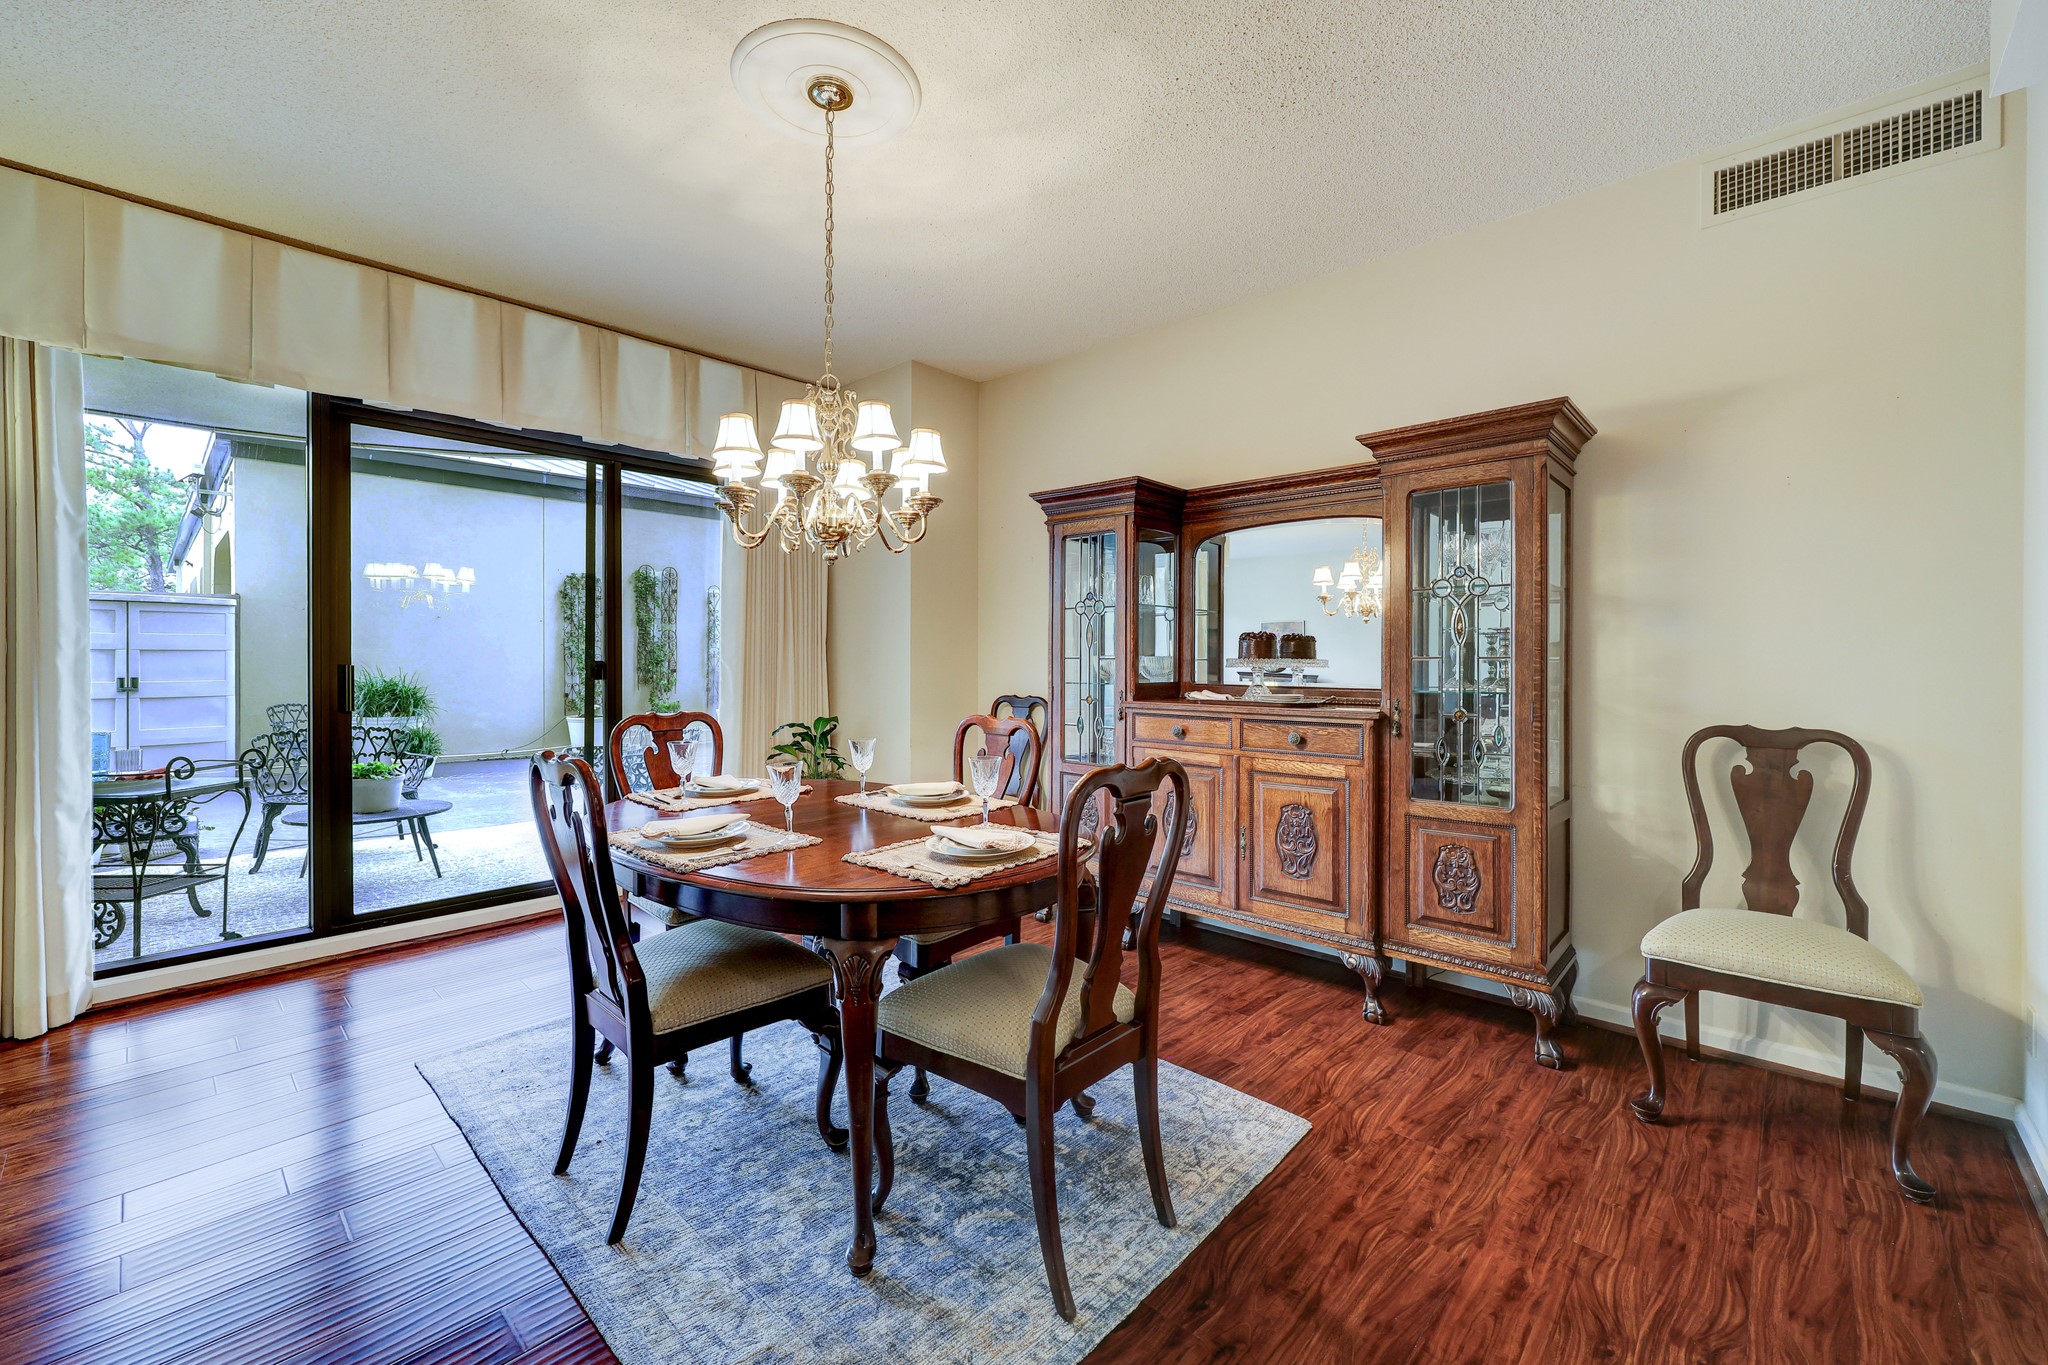 Dining area with plenty of space for China cabinet and table that can be extended with multiple leaves.